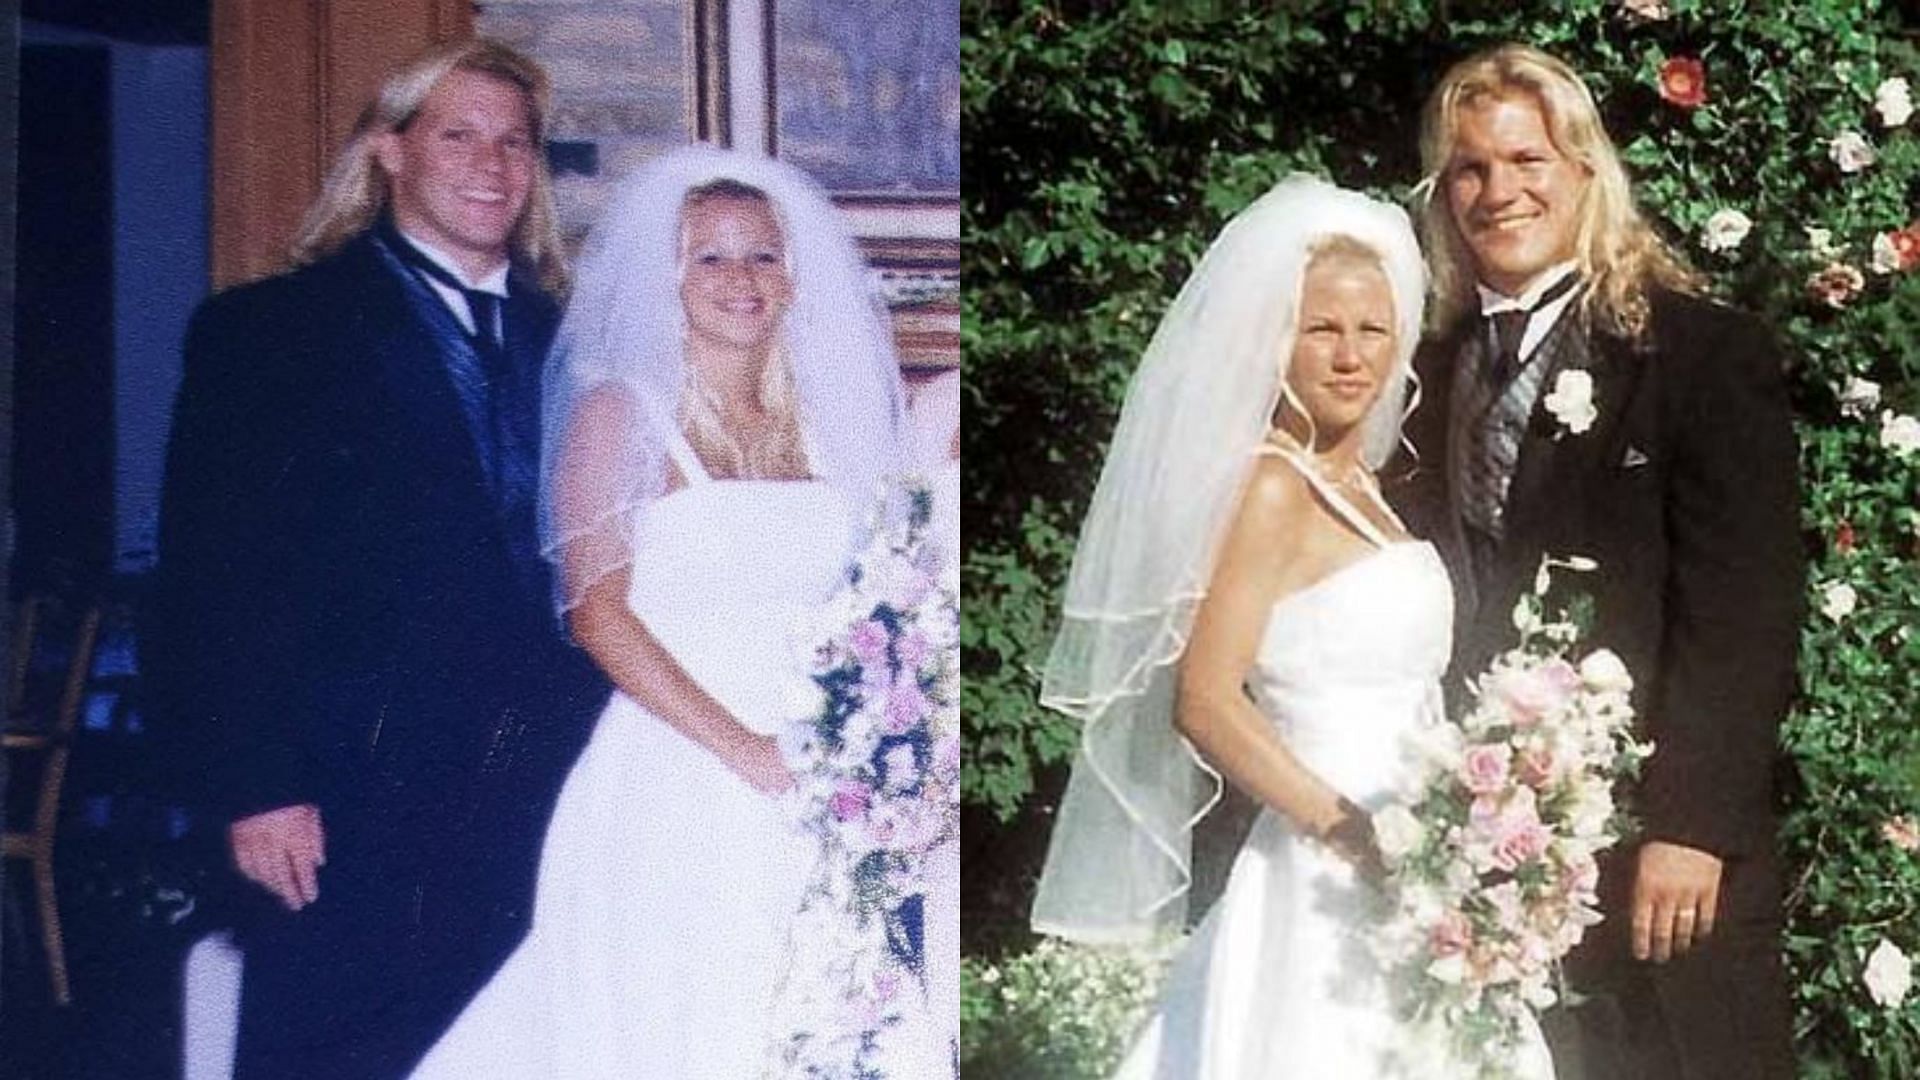 Chris Jericho and Jessica Lockhart married in July 2000